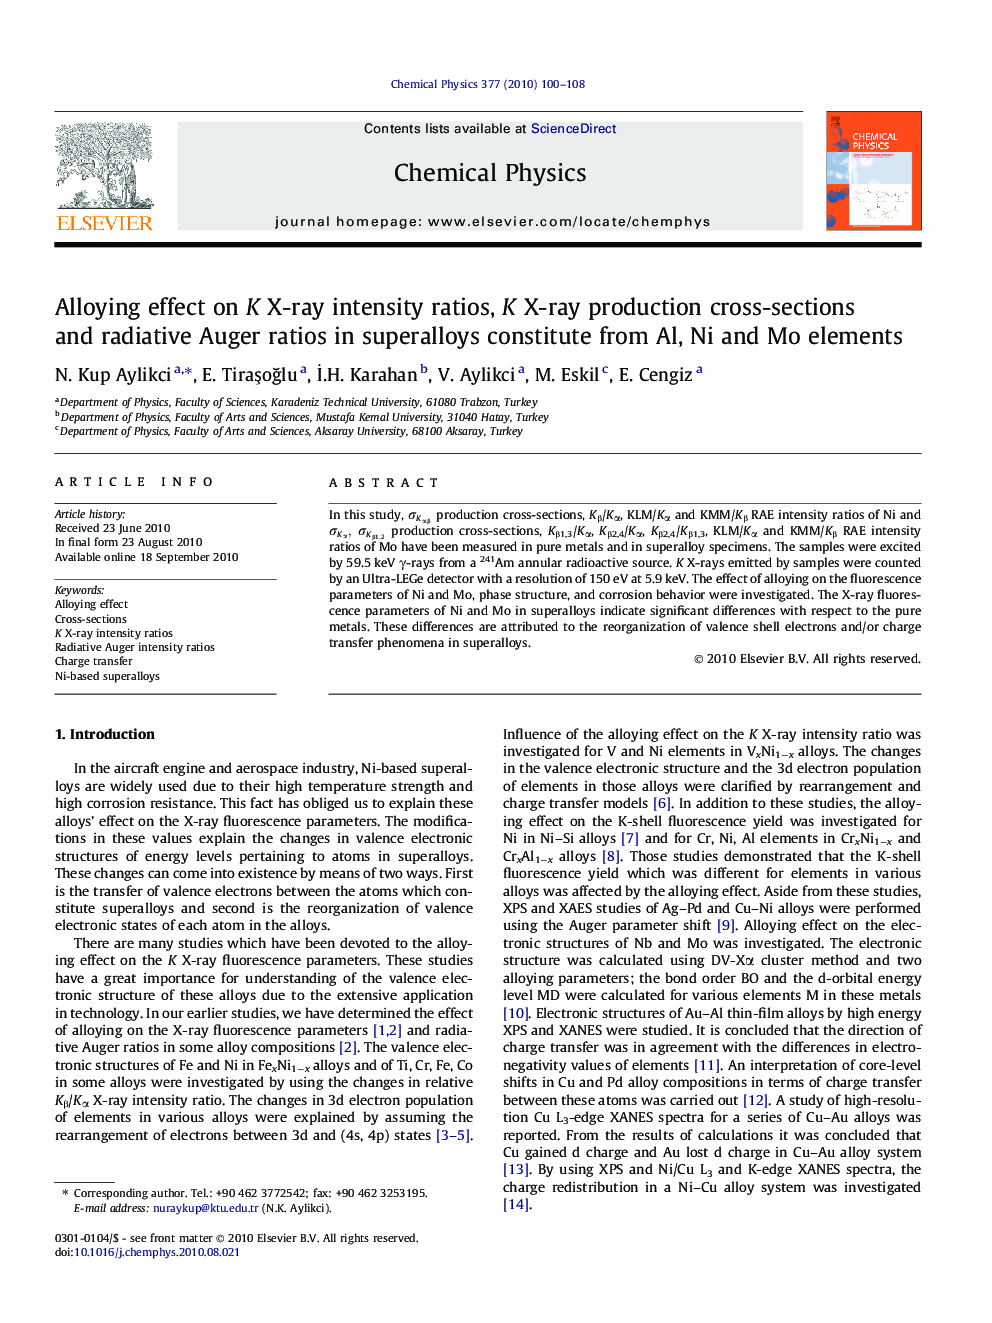 Alloying effect on K X-ray intensity ratios, K X-ray production cross-sections and radiative Auger ratios in superalloys constitute from Al, Ni and Mo elements